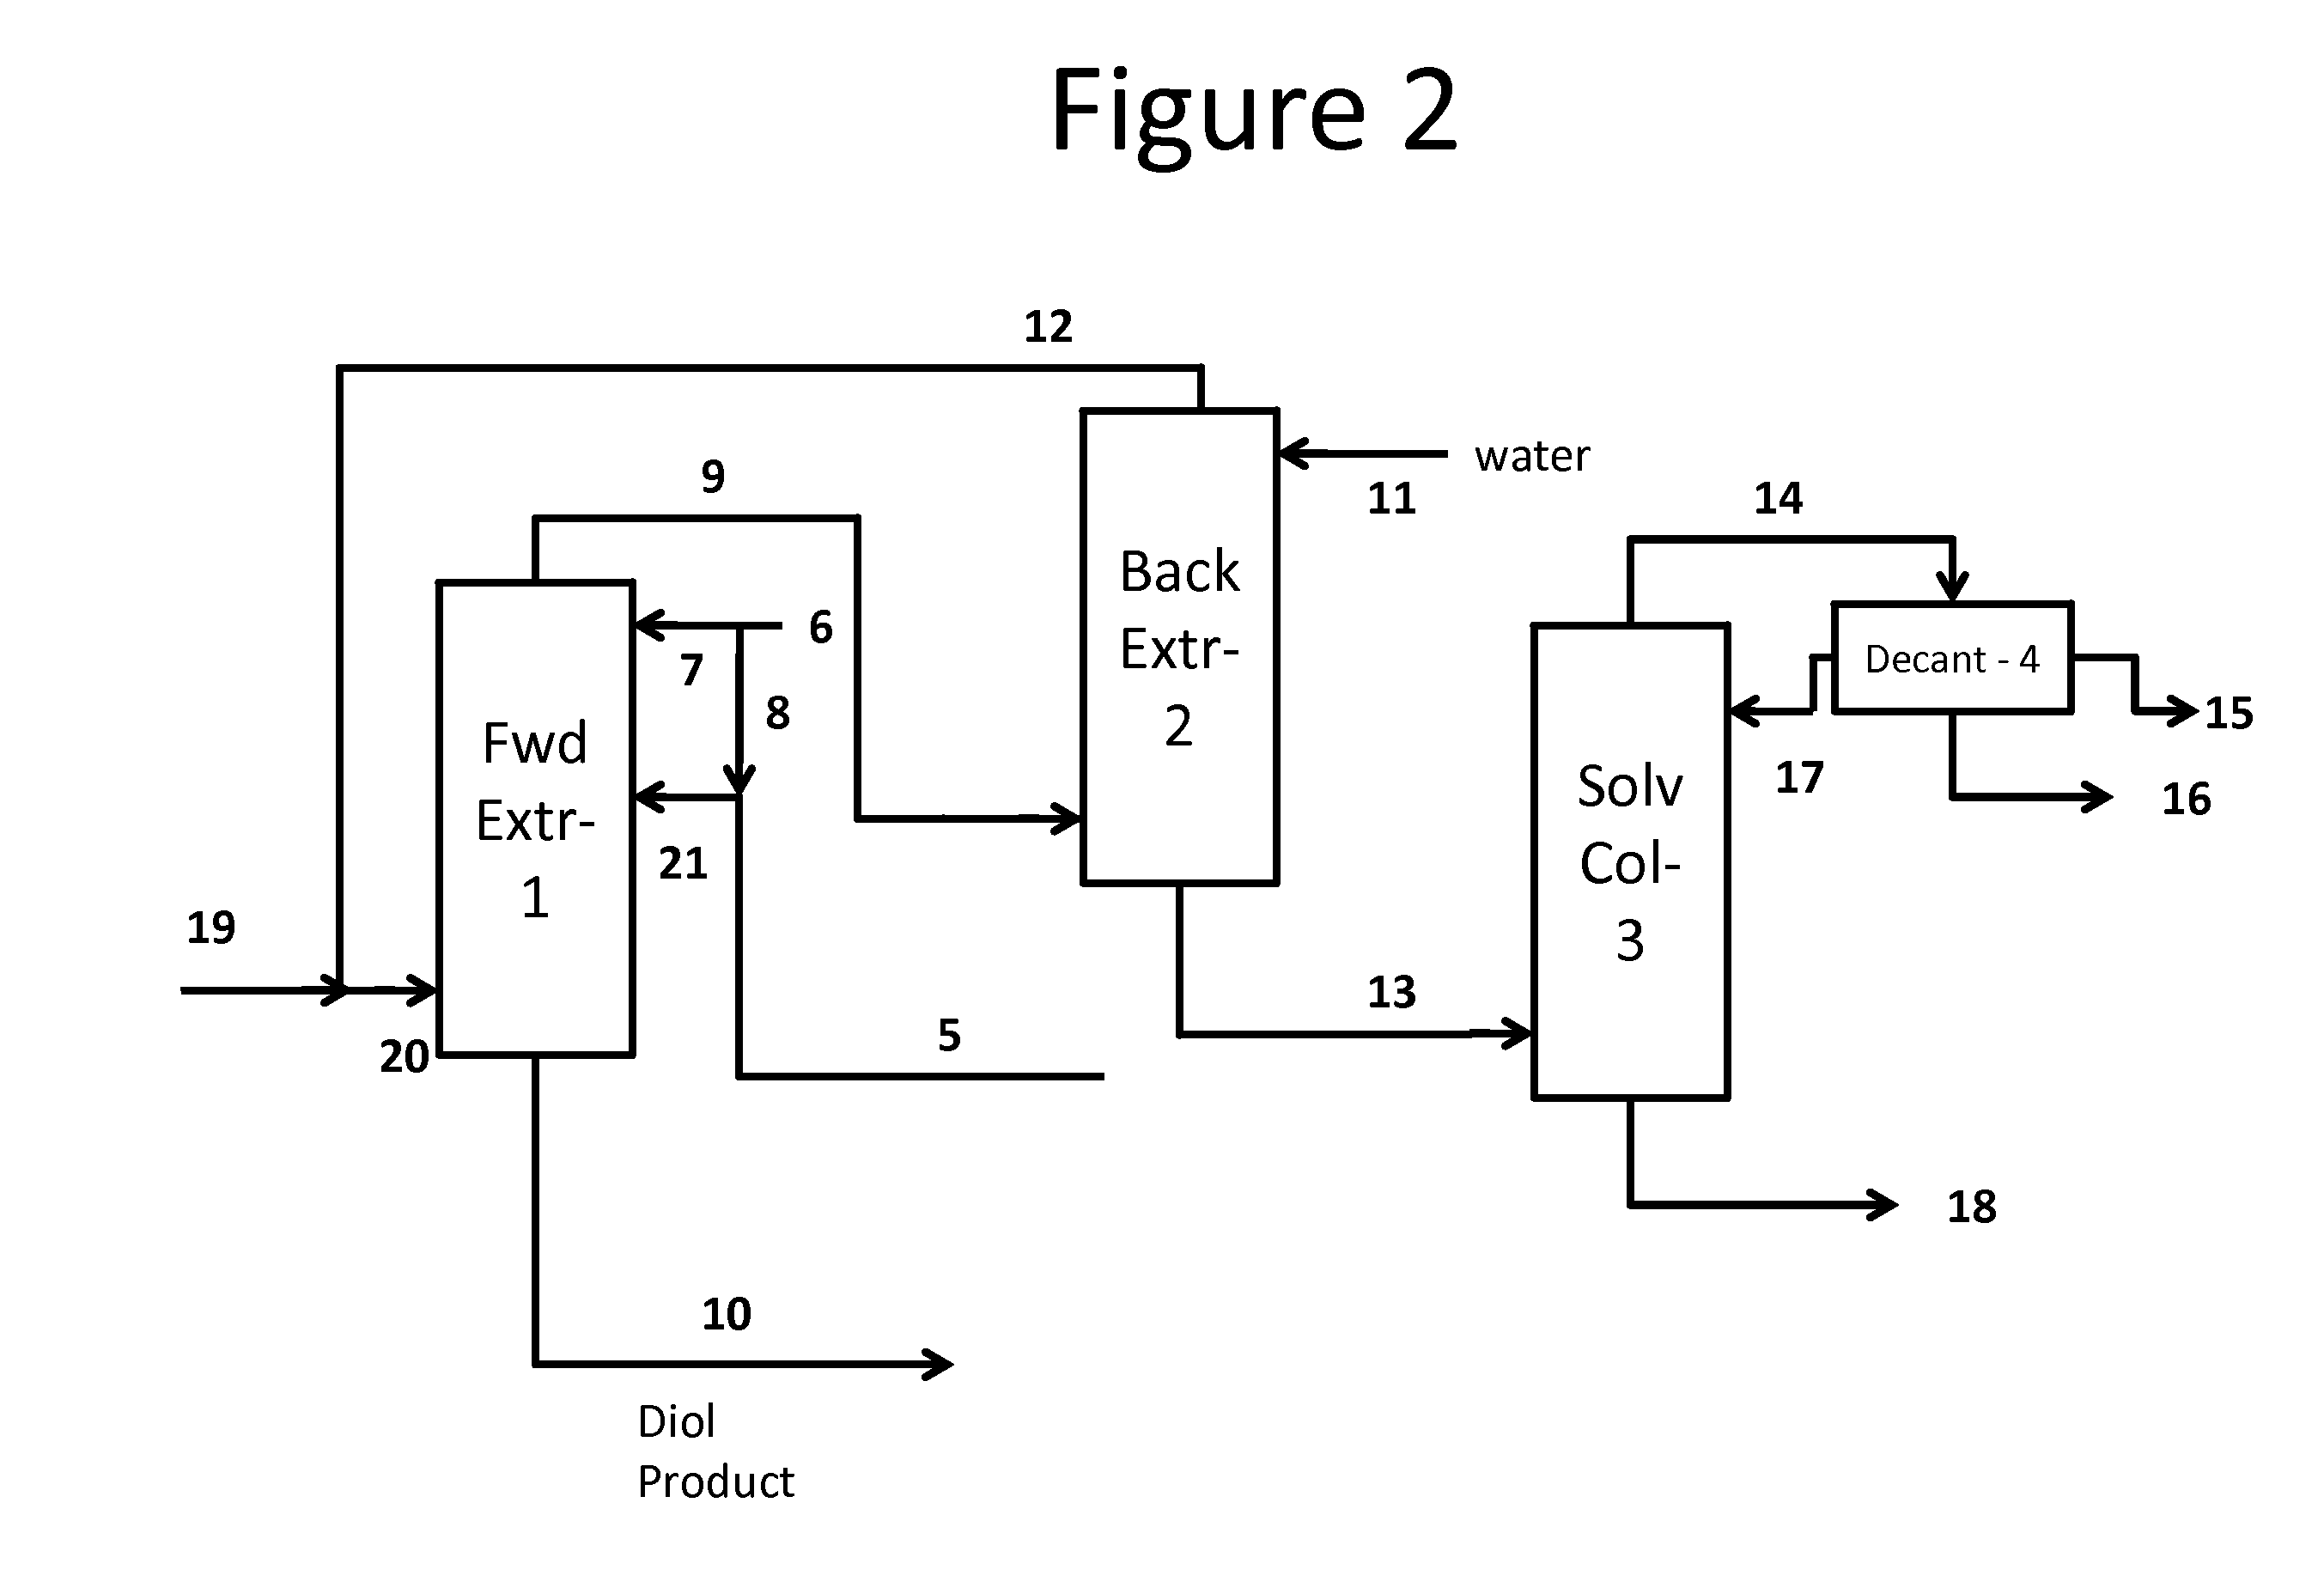 Process for the separation and purification of a mixed diol stream